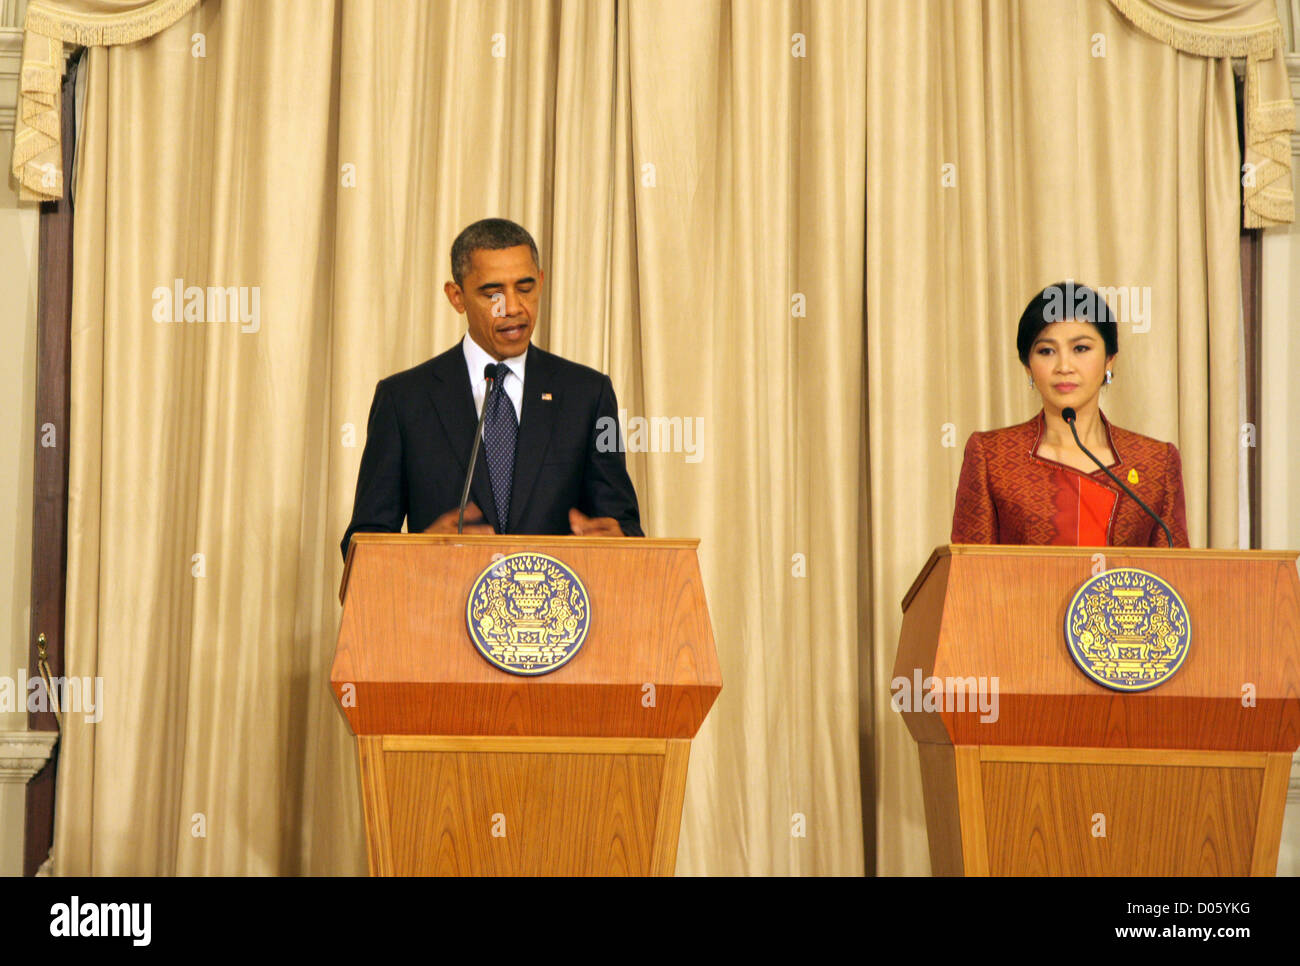 Bangkok, Thailand. 18th November , 2012 . During a joint press conference following their bilateral meeting at the Thai Government House. Obama landed in Thailand , intensifying his diplomatic 'pivot' to Asia, on a tour which will see him make history by visiting Myanmar in a bid to encourage political reform.  After arriving at Bangkok's Don Mueang airport just after 3pm, Mr Obama met a group of Thai officials, including His Majesty the King's representative Gen Surayud Chulanond. The re-elected president and his entourage then met 600 members of the US embassy staff and later visited Wat Pho Stock Photo